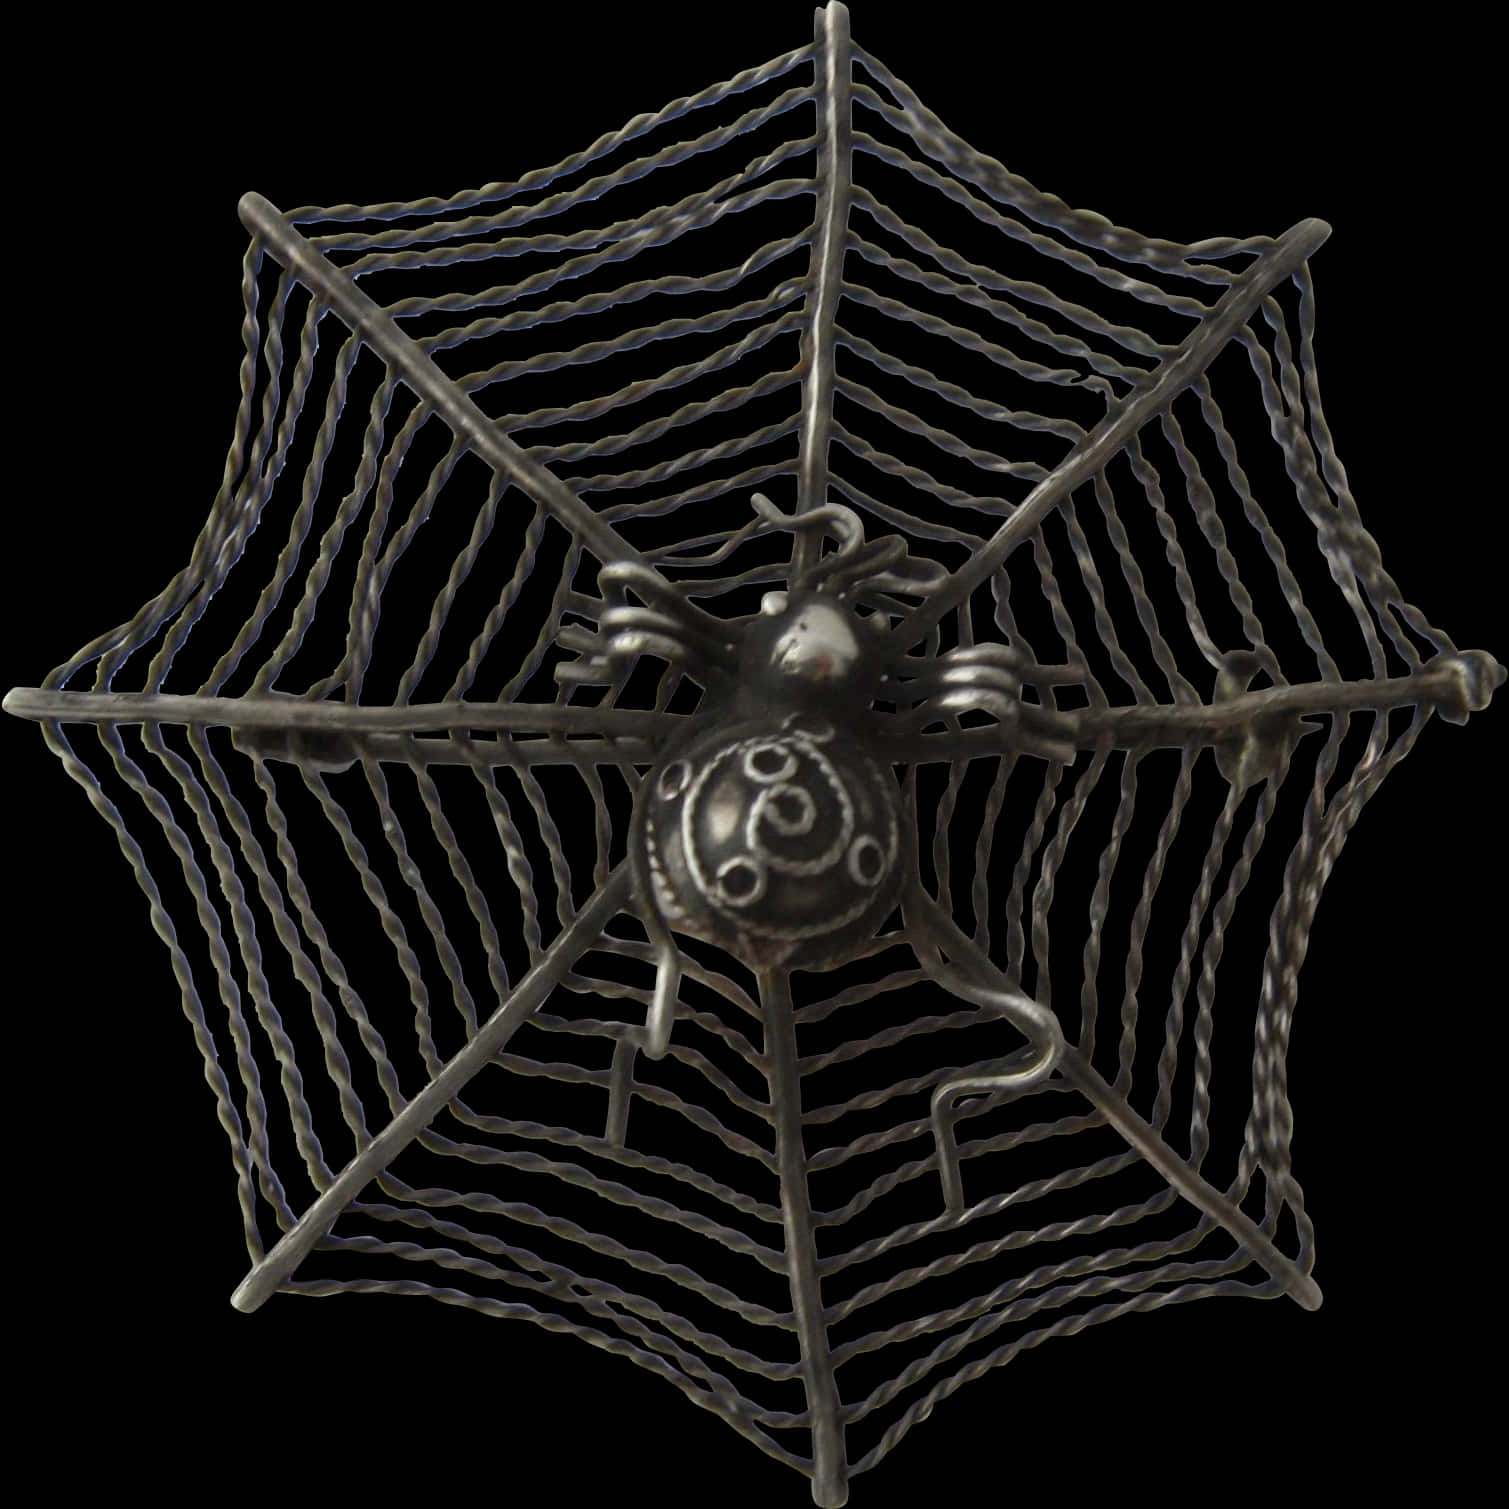 A Metal Spider Web With A Spider On It